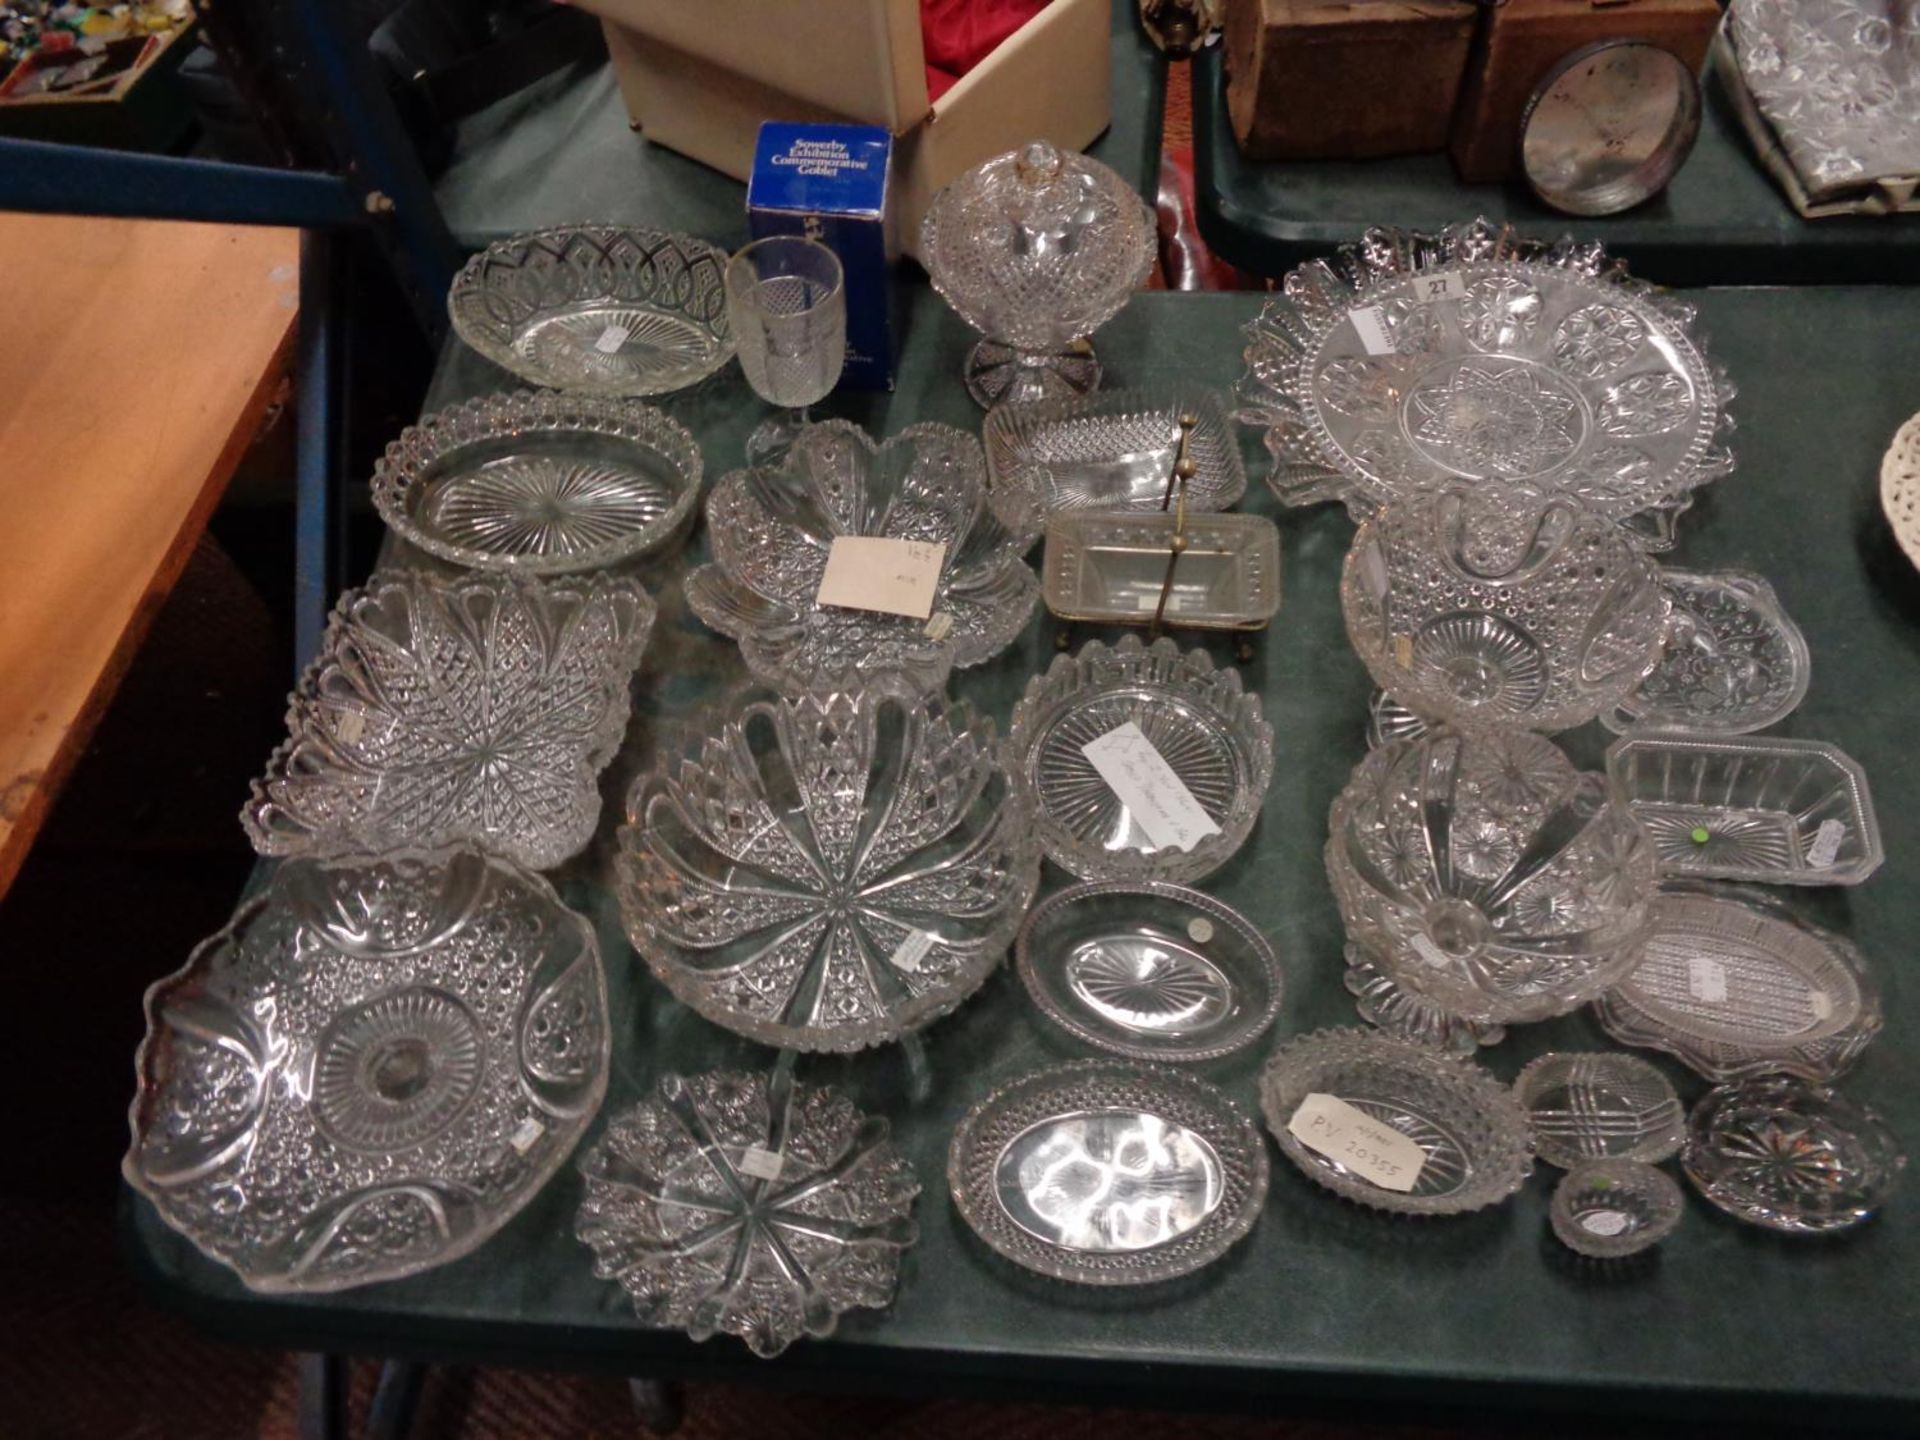 A LARGE SELECTION OF CLEAR GLASSWARE BOWLS, TRINKET DISHES AND A CAKE STAND